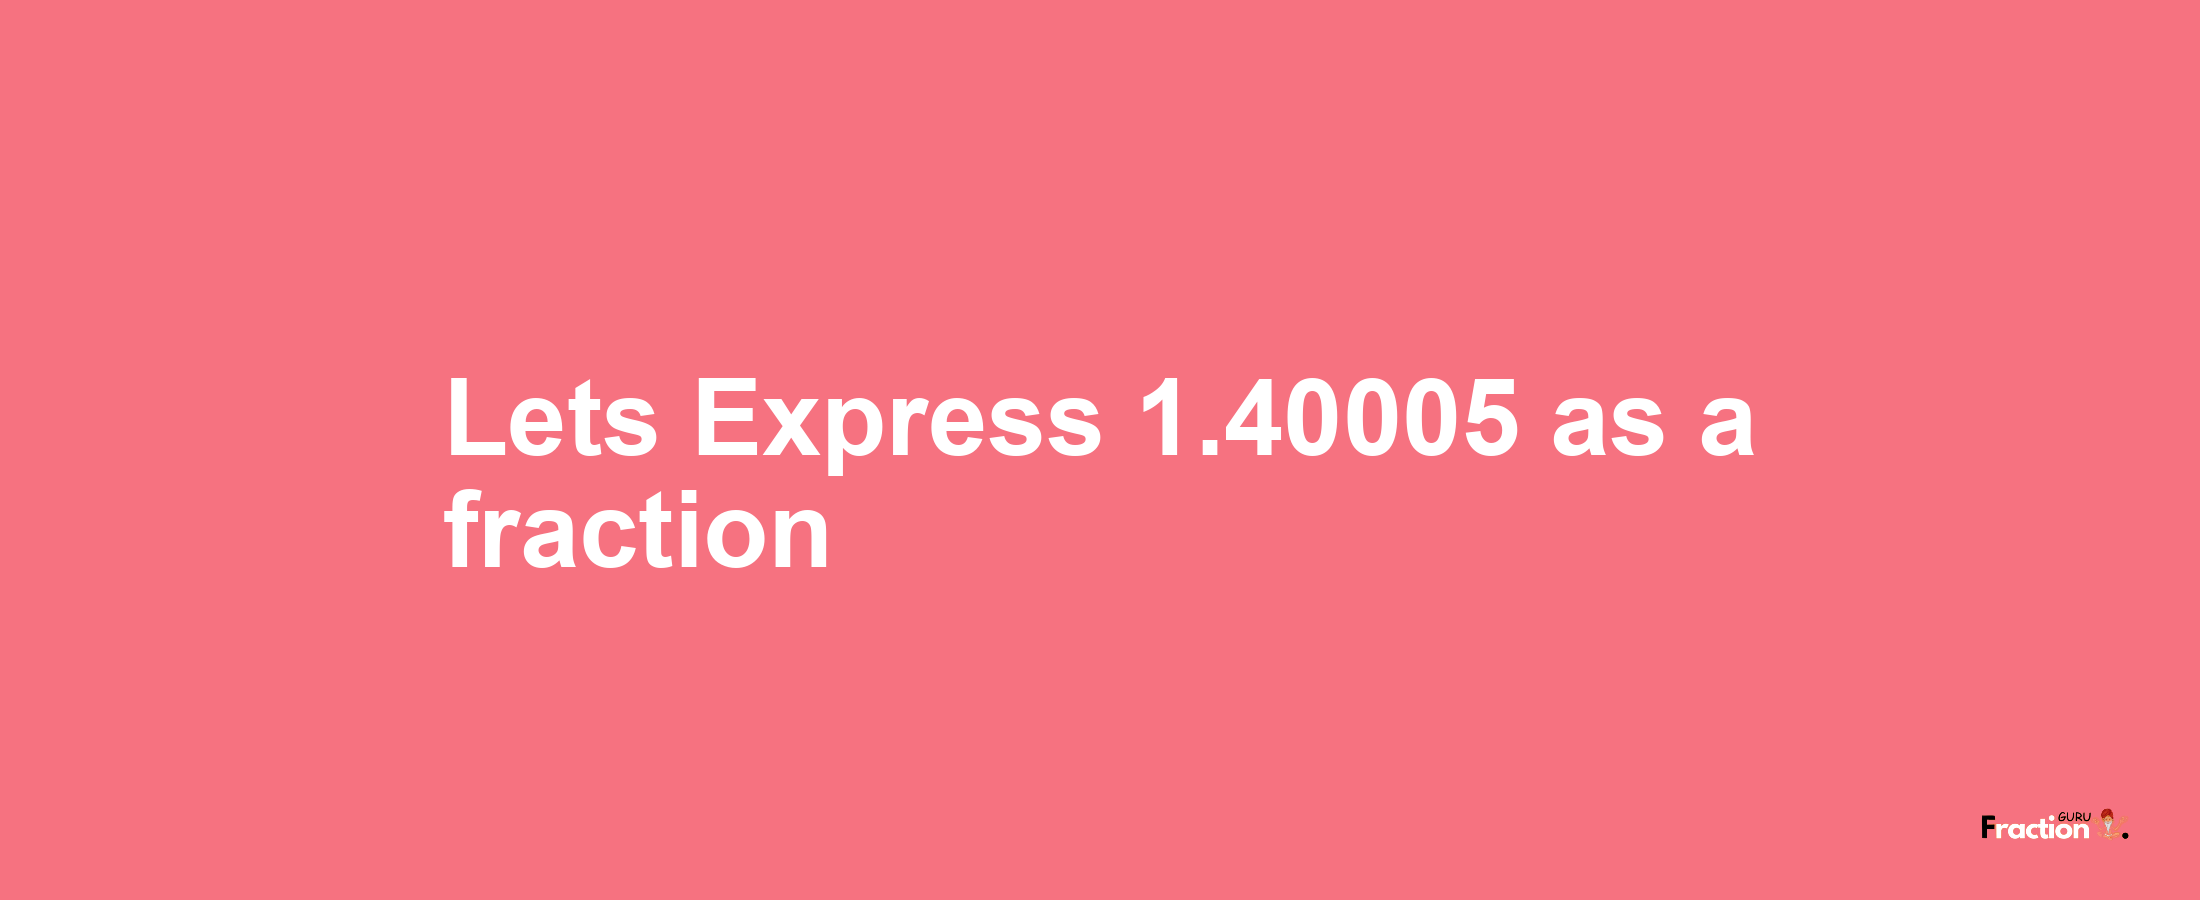 Lets Express 1.40005 as afraction